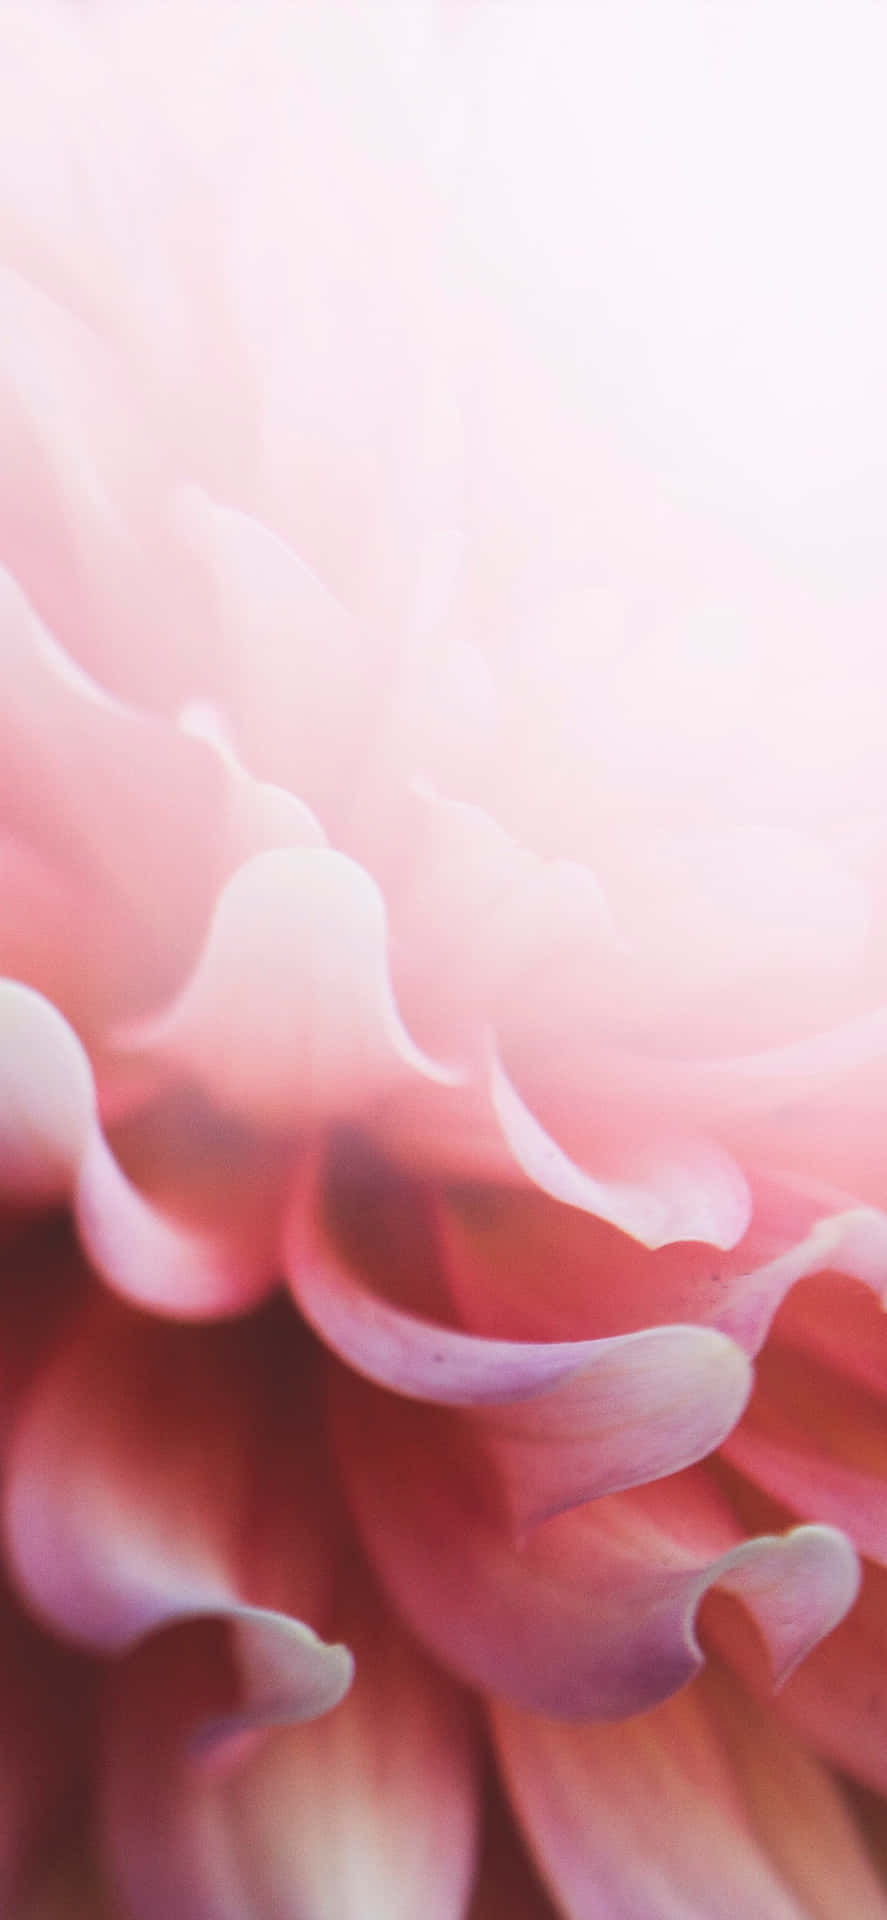 Spruce Up Any Look With This Light Pink Floral Iphone Wallpaper